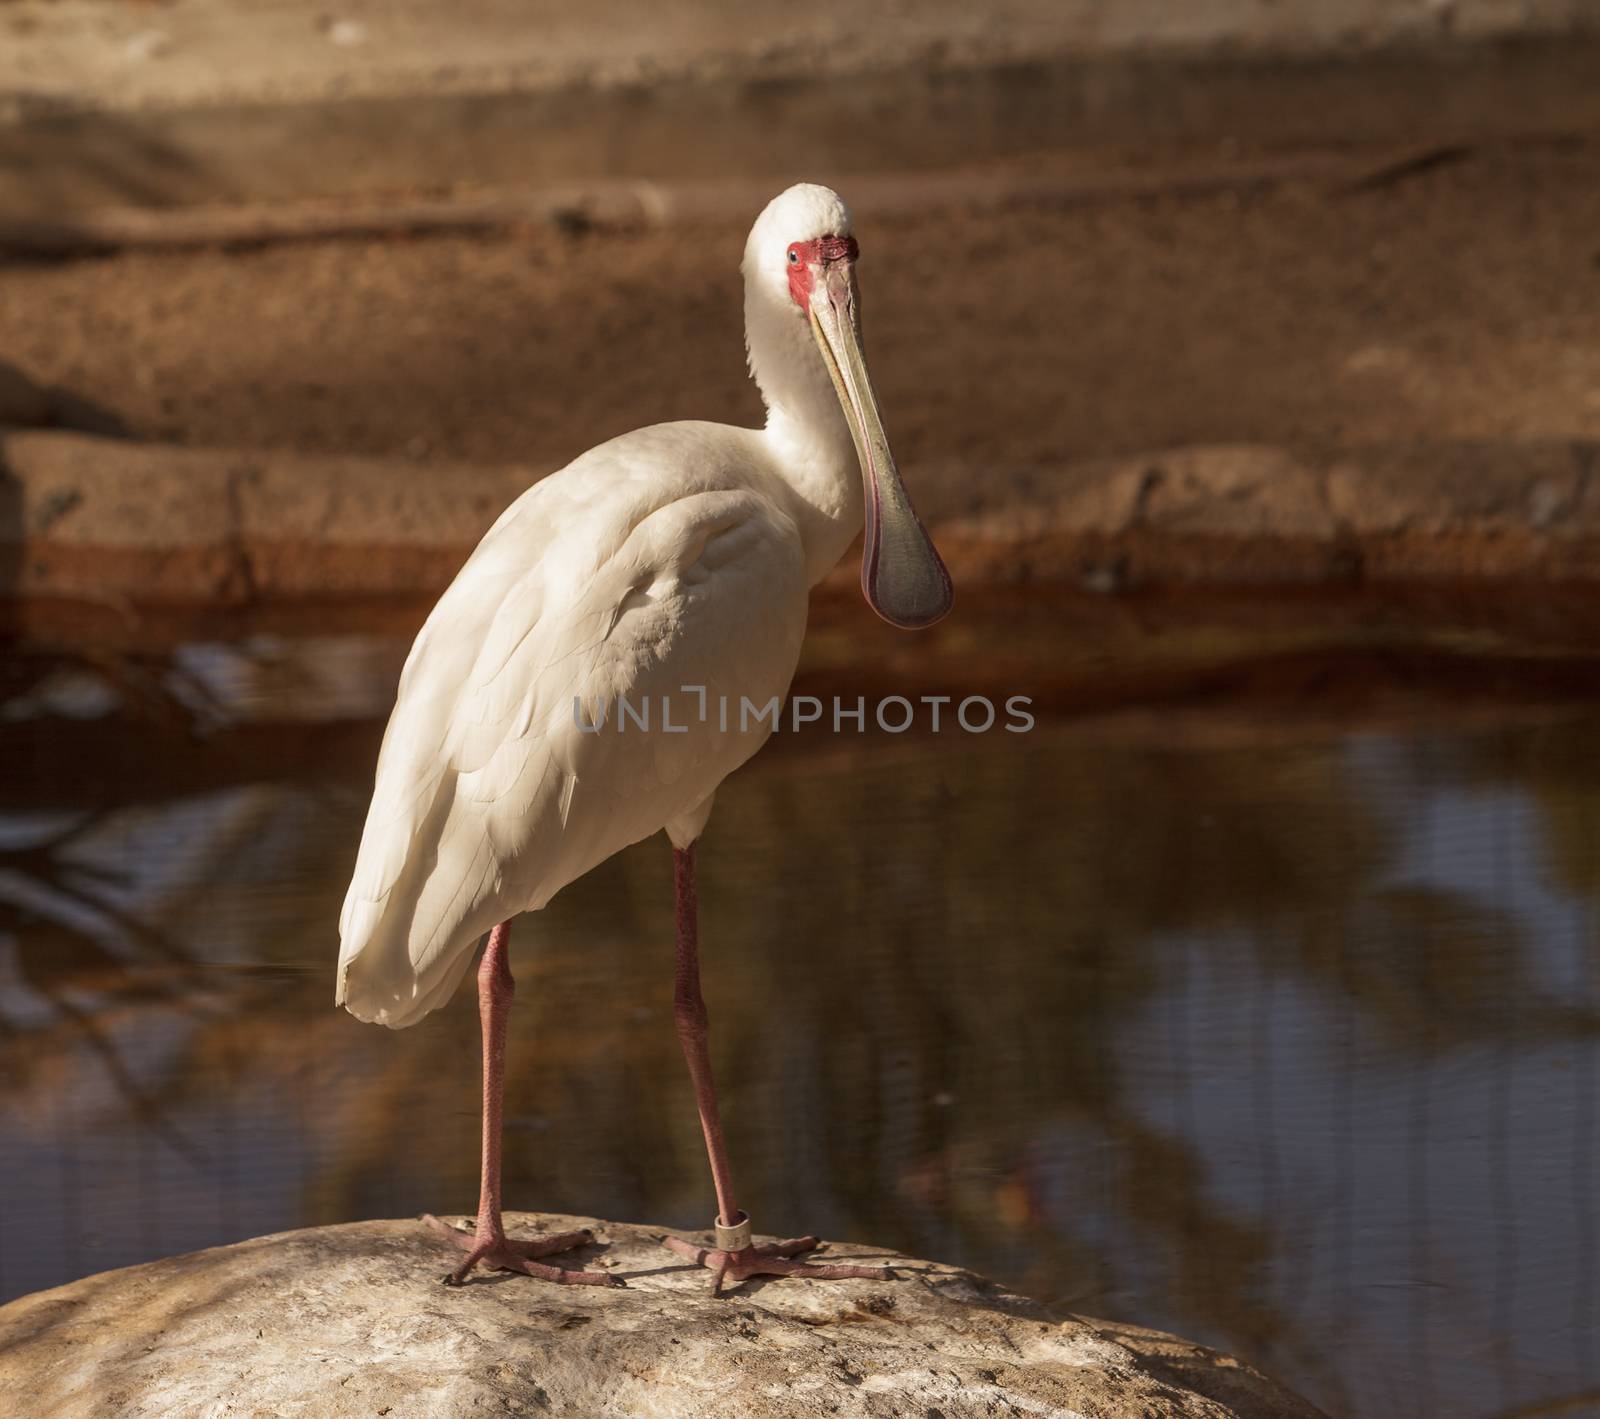 African spoonbill, Platalea alba, is a white bird with a red face found in Africa in rivers and streams.